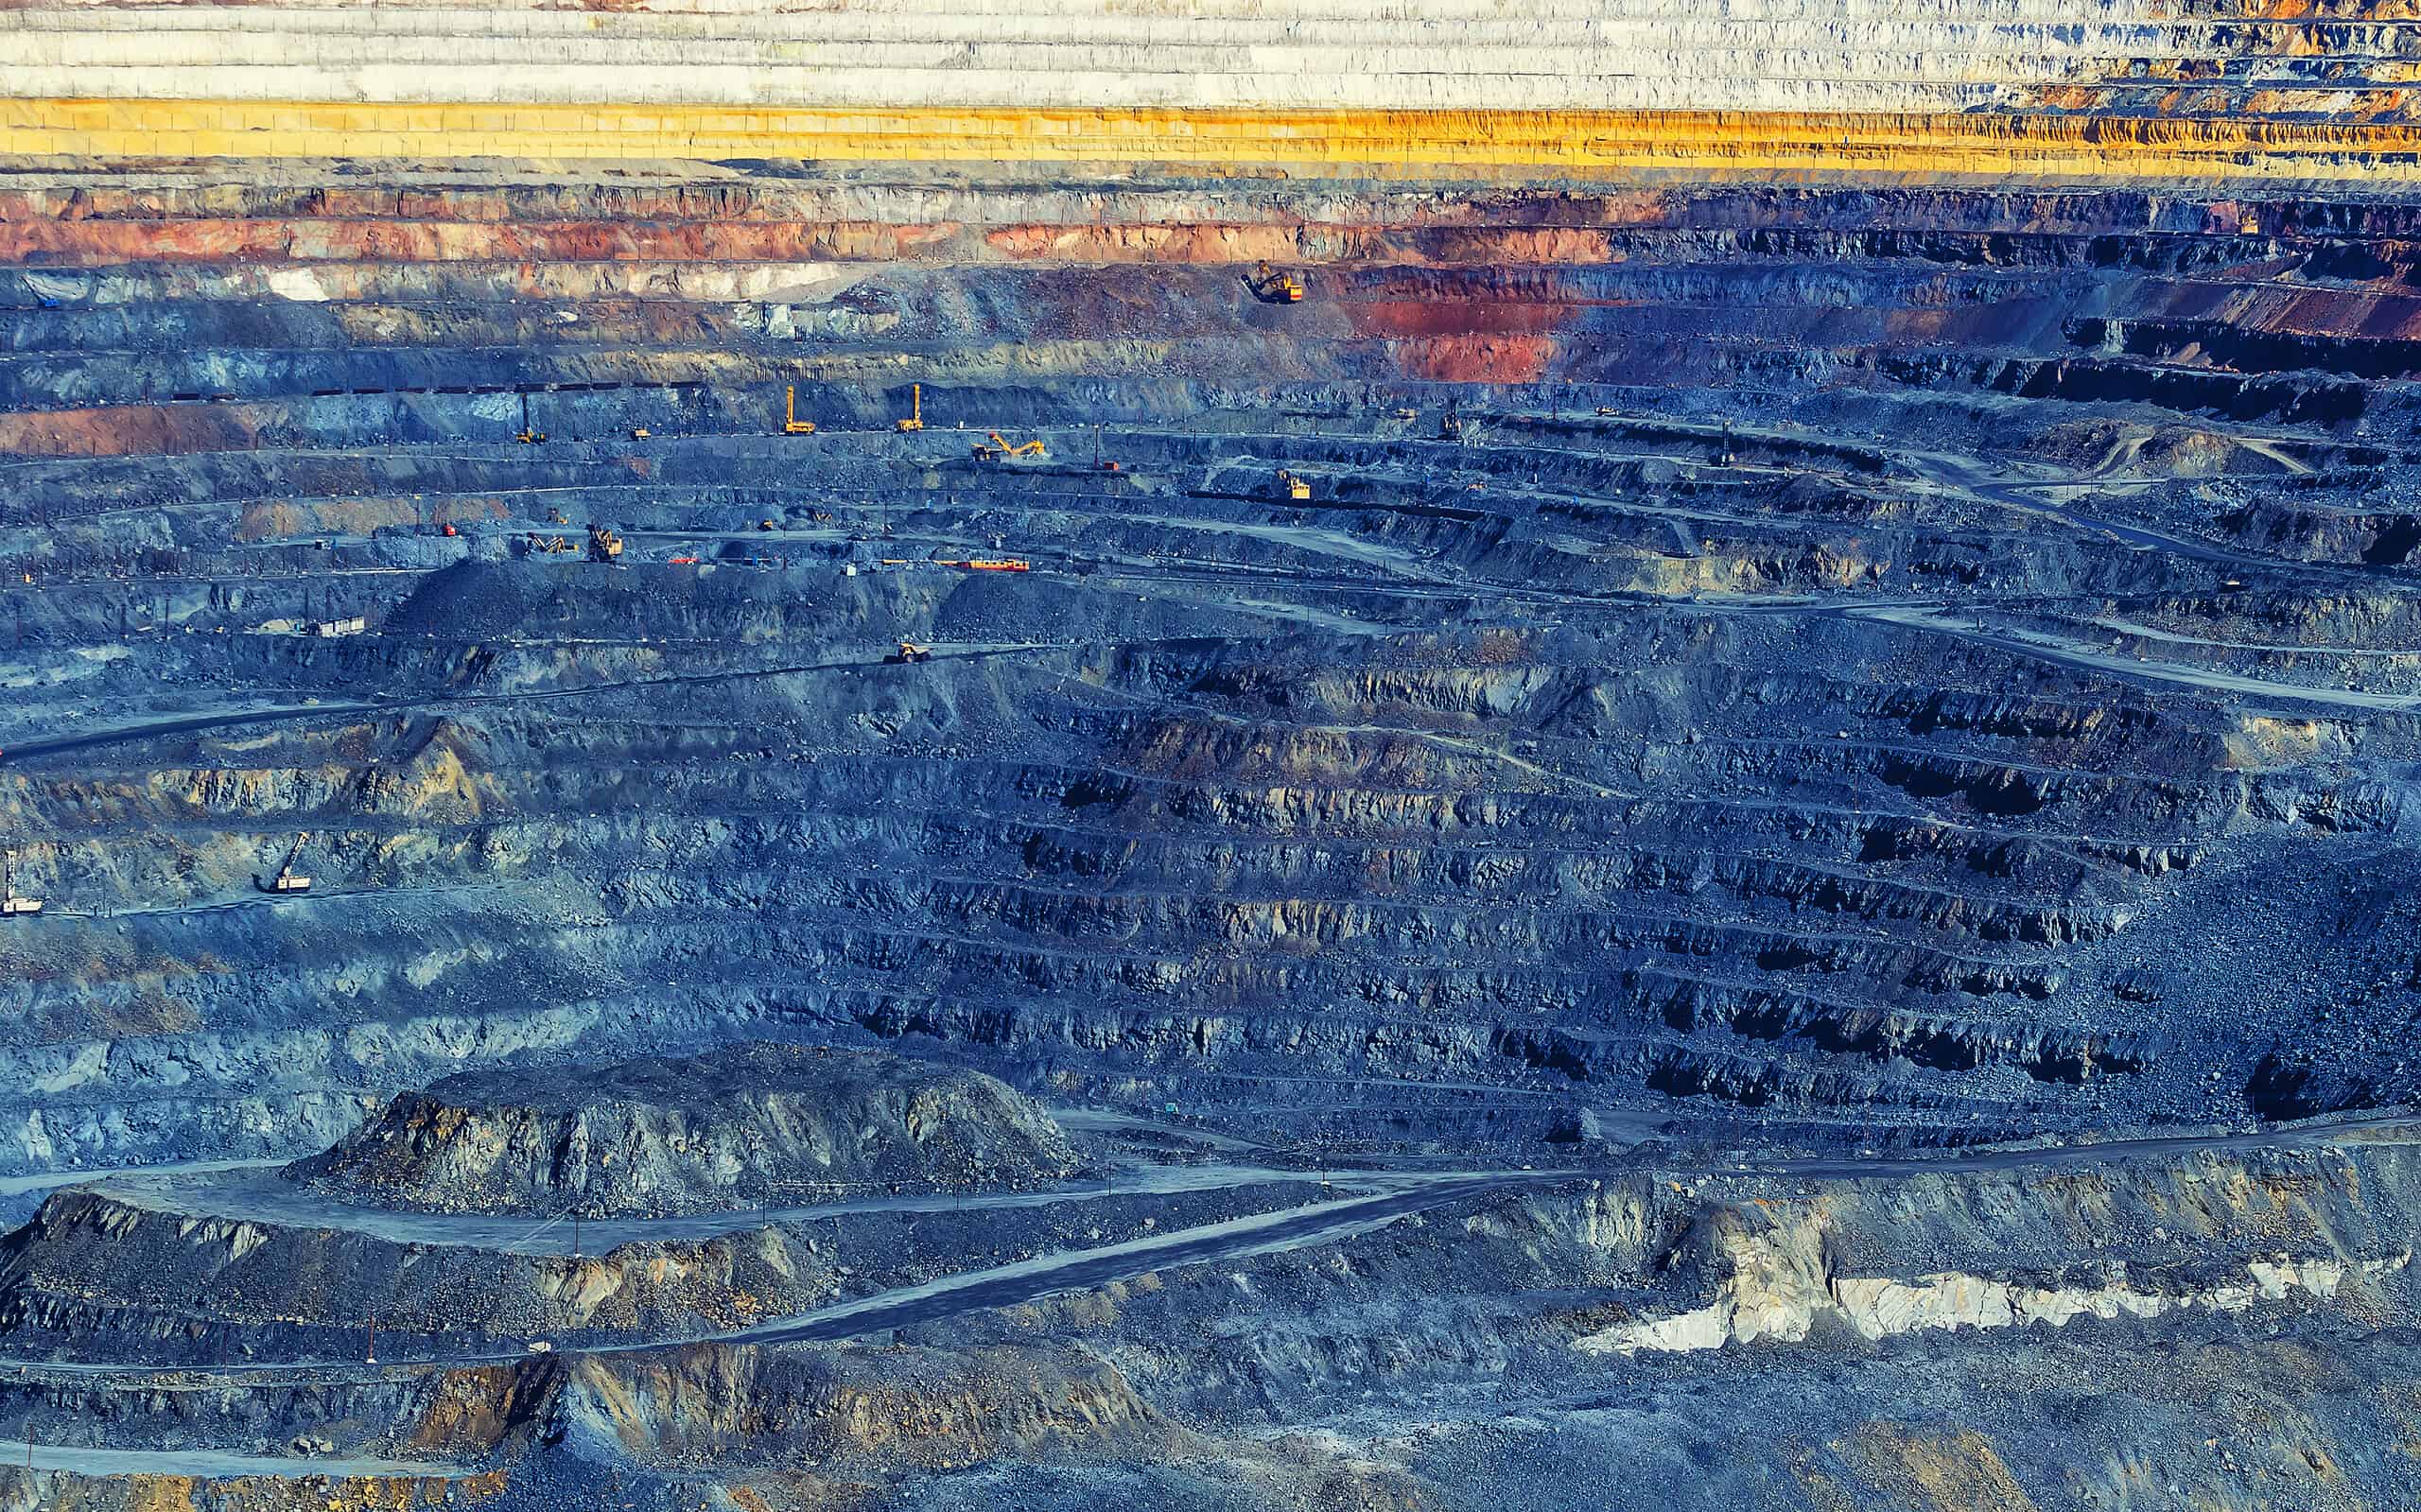 Detail of mining levels at open mine pit